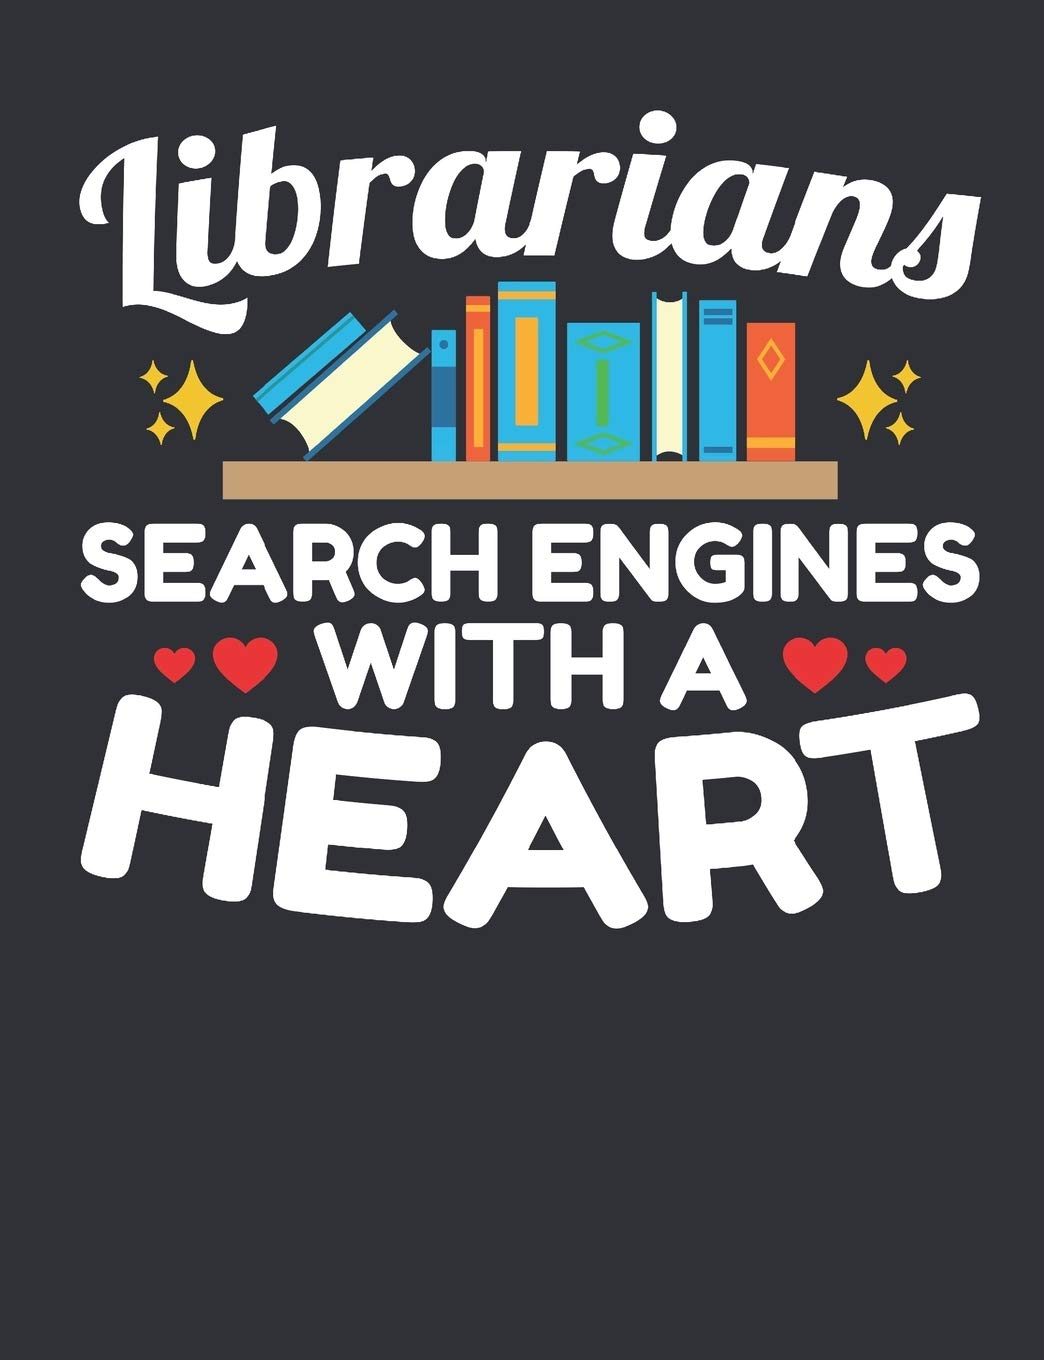 Librarians Search engines with a heart